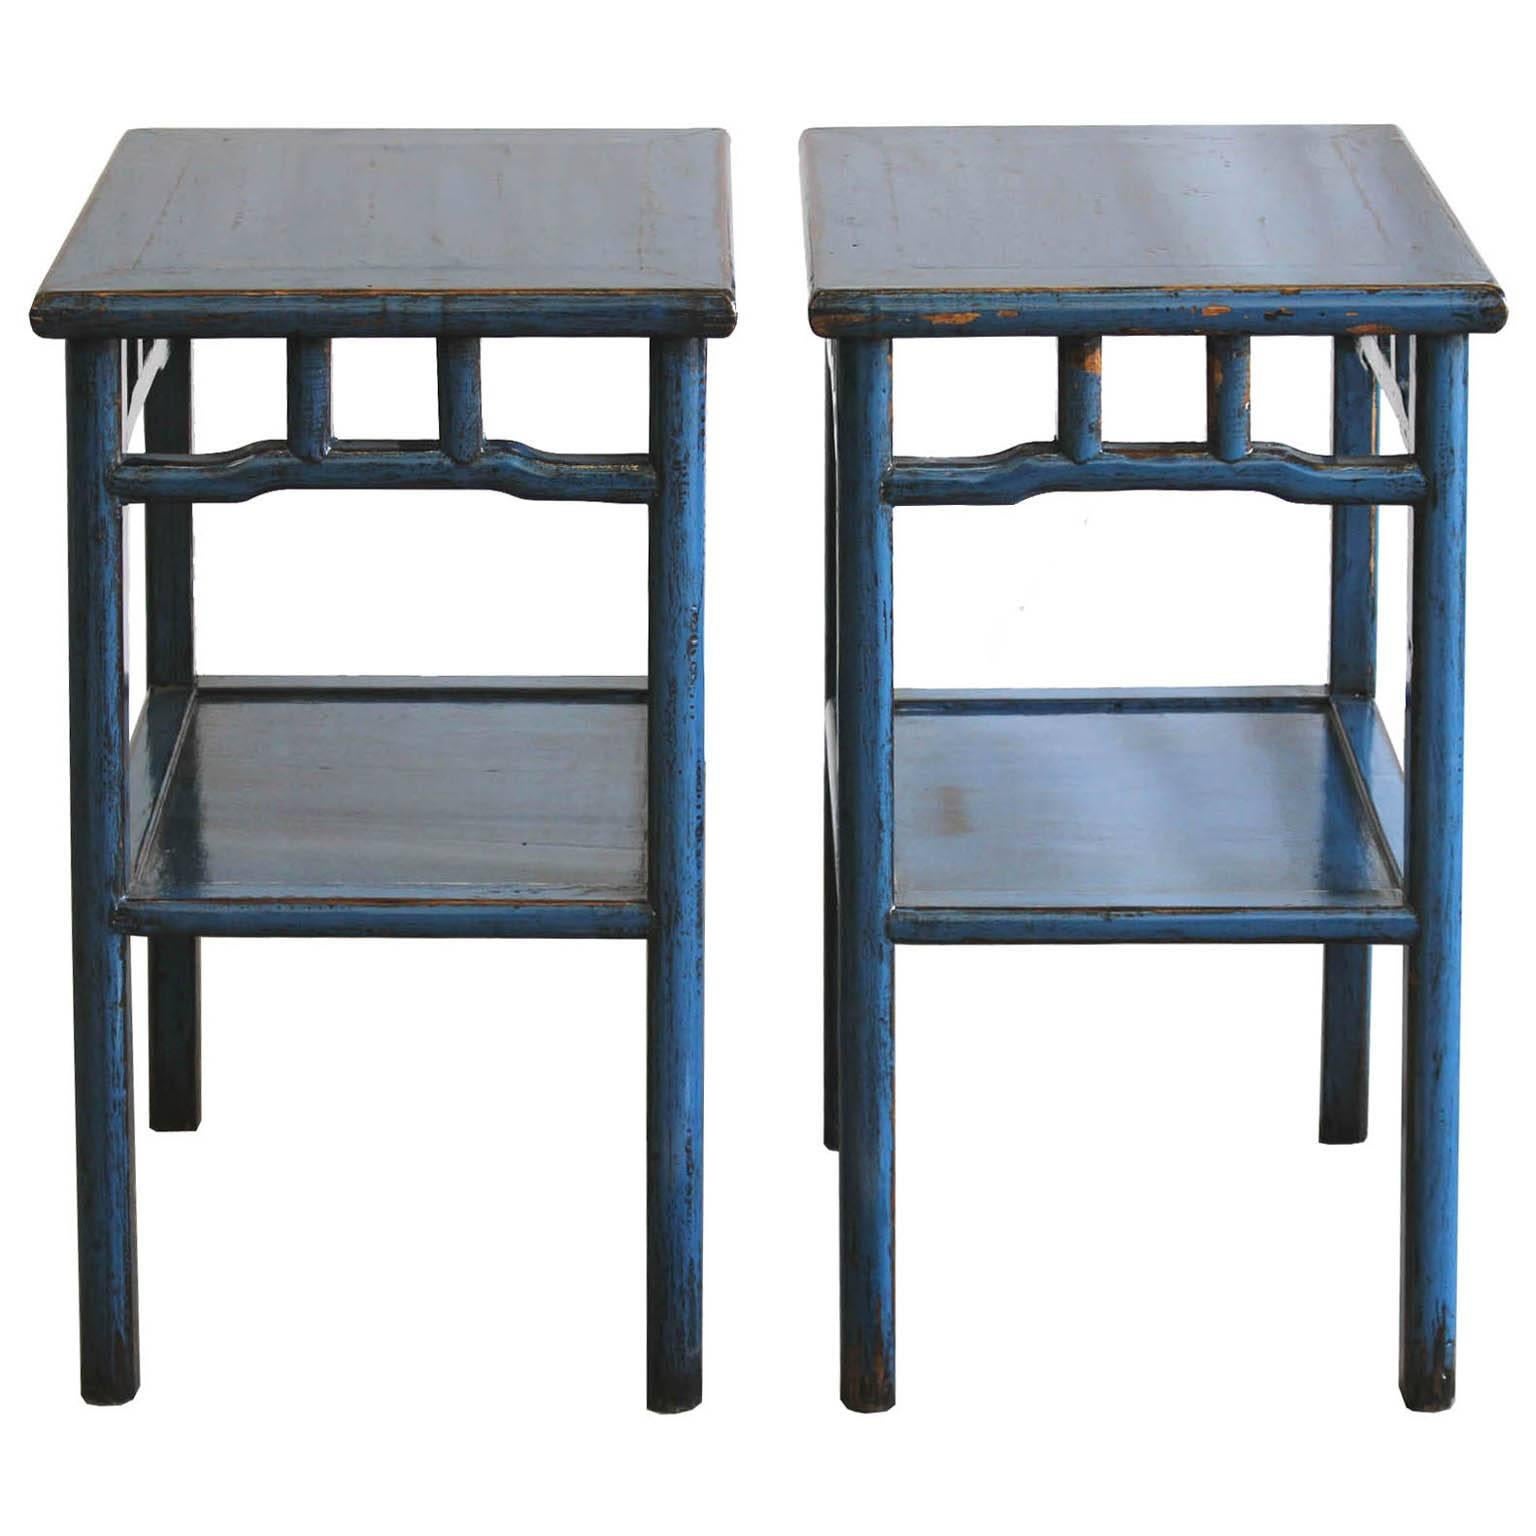 Contemporary blue lacquer end tables with exposed wood edges and bottom shelf can be used as bedside tables. Available individually.